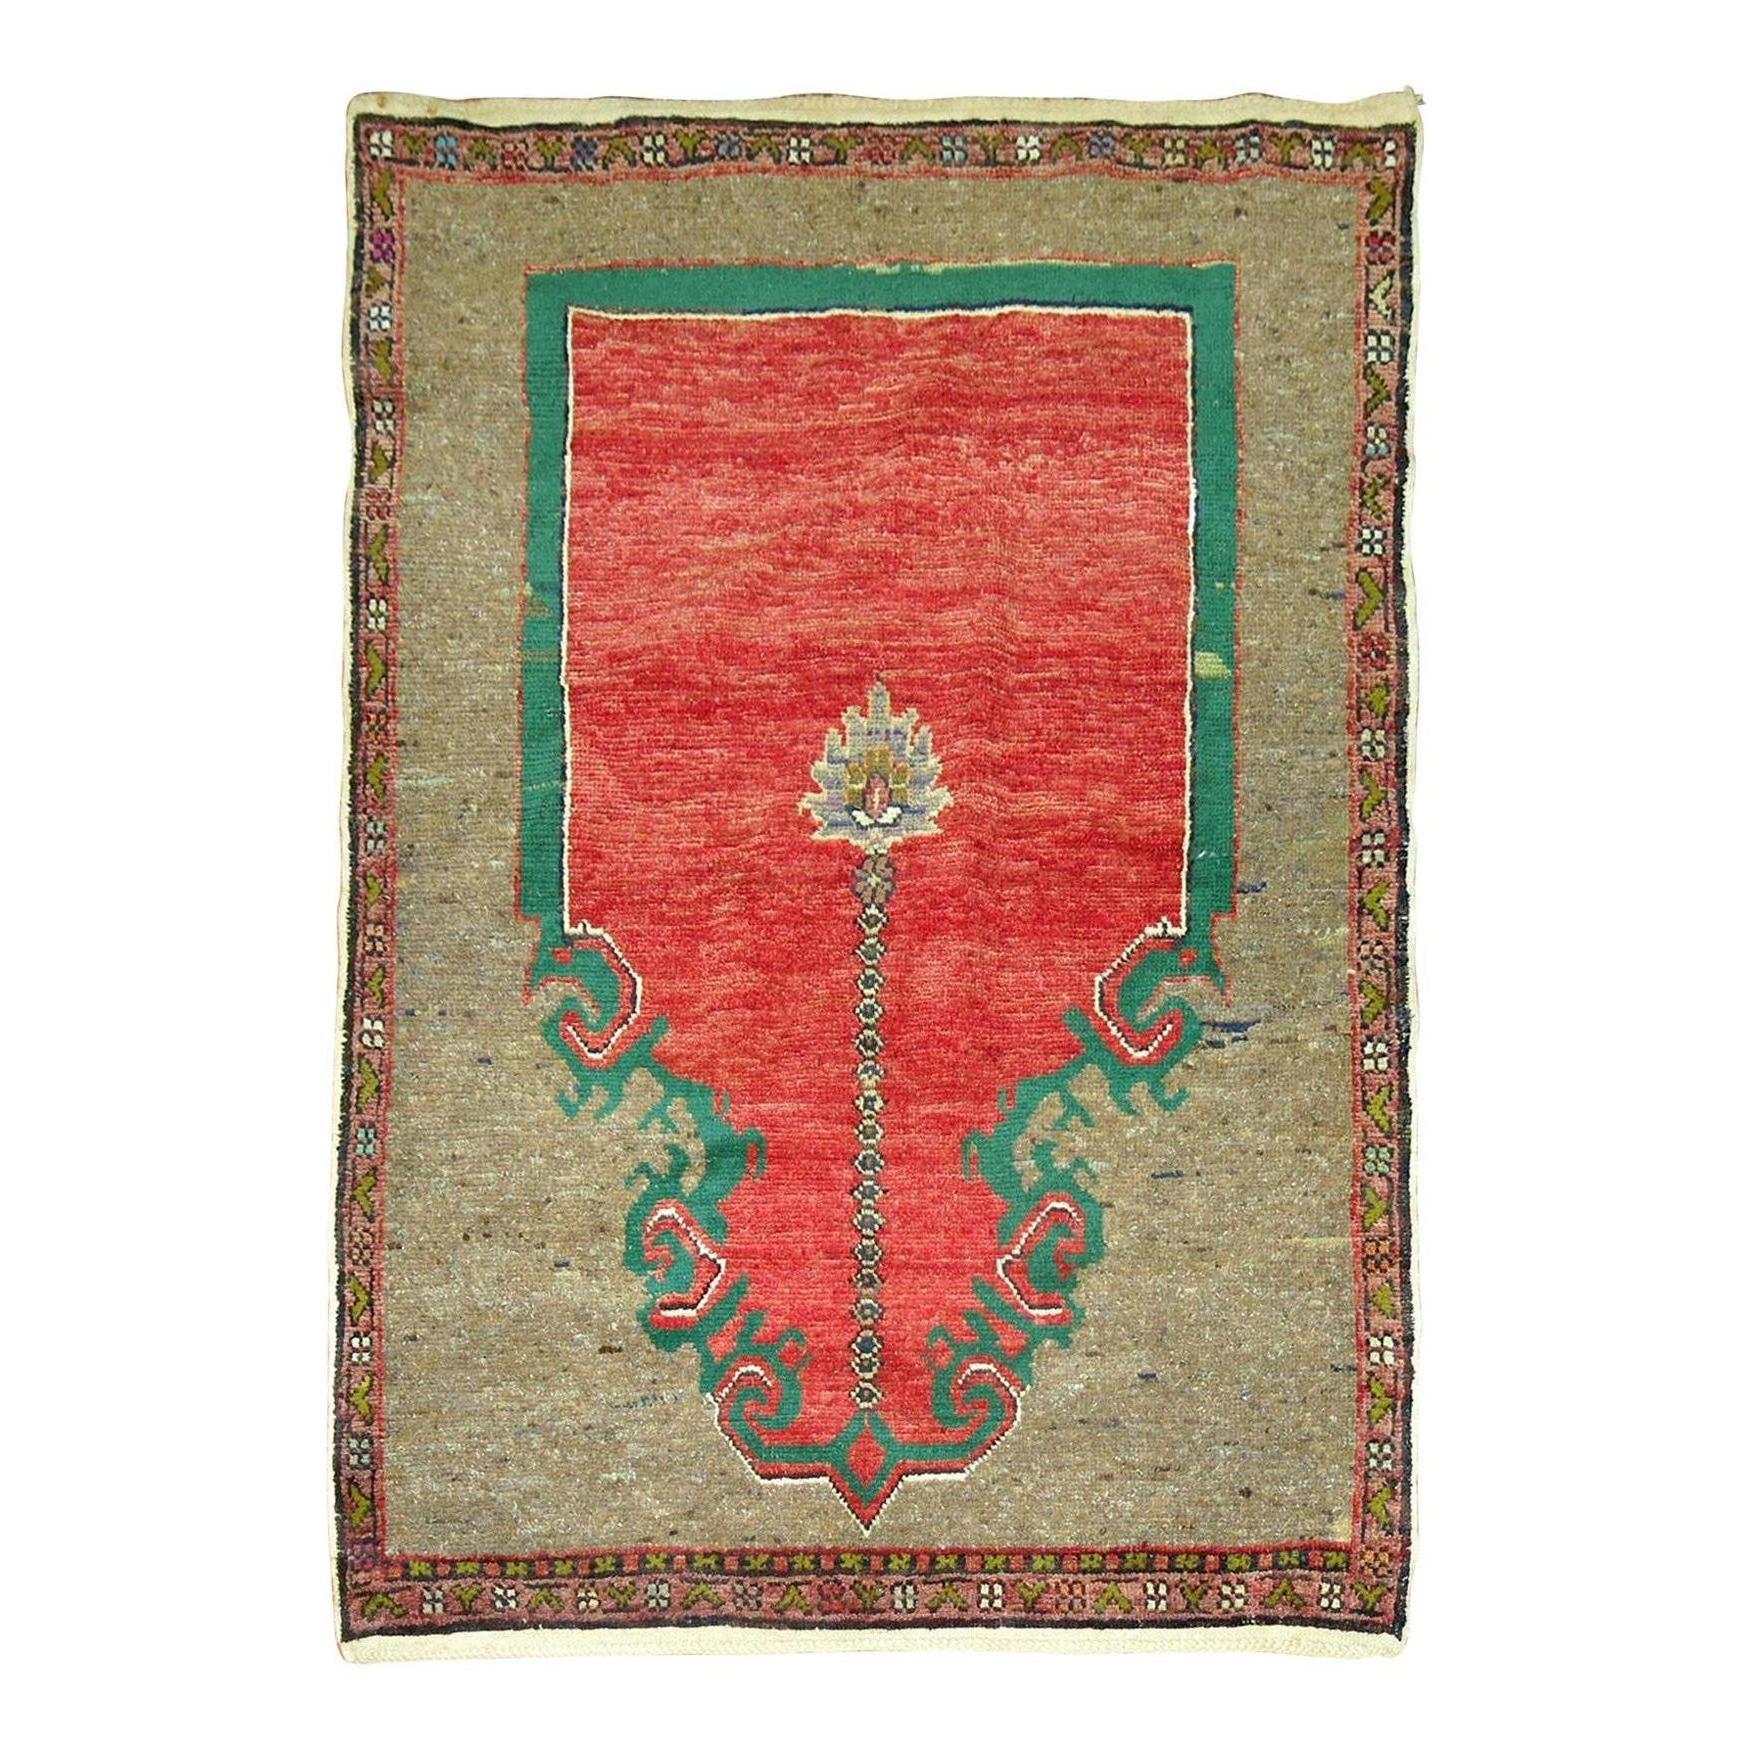 One of a kind Turkish prayer rug woven in central Turkey

Measures: 2'11